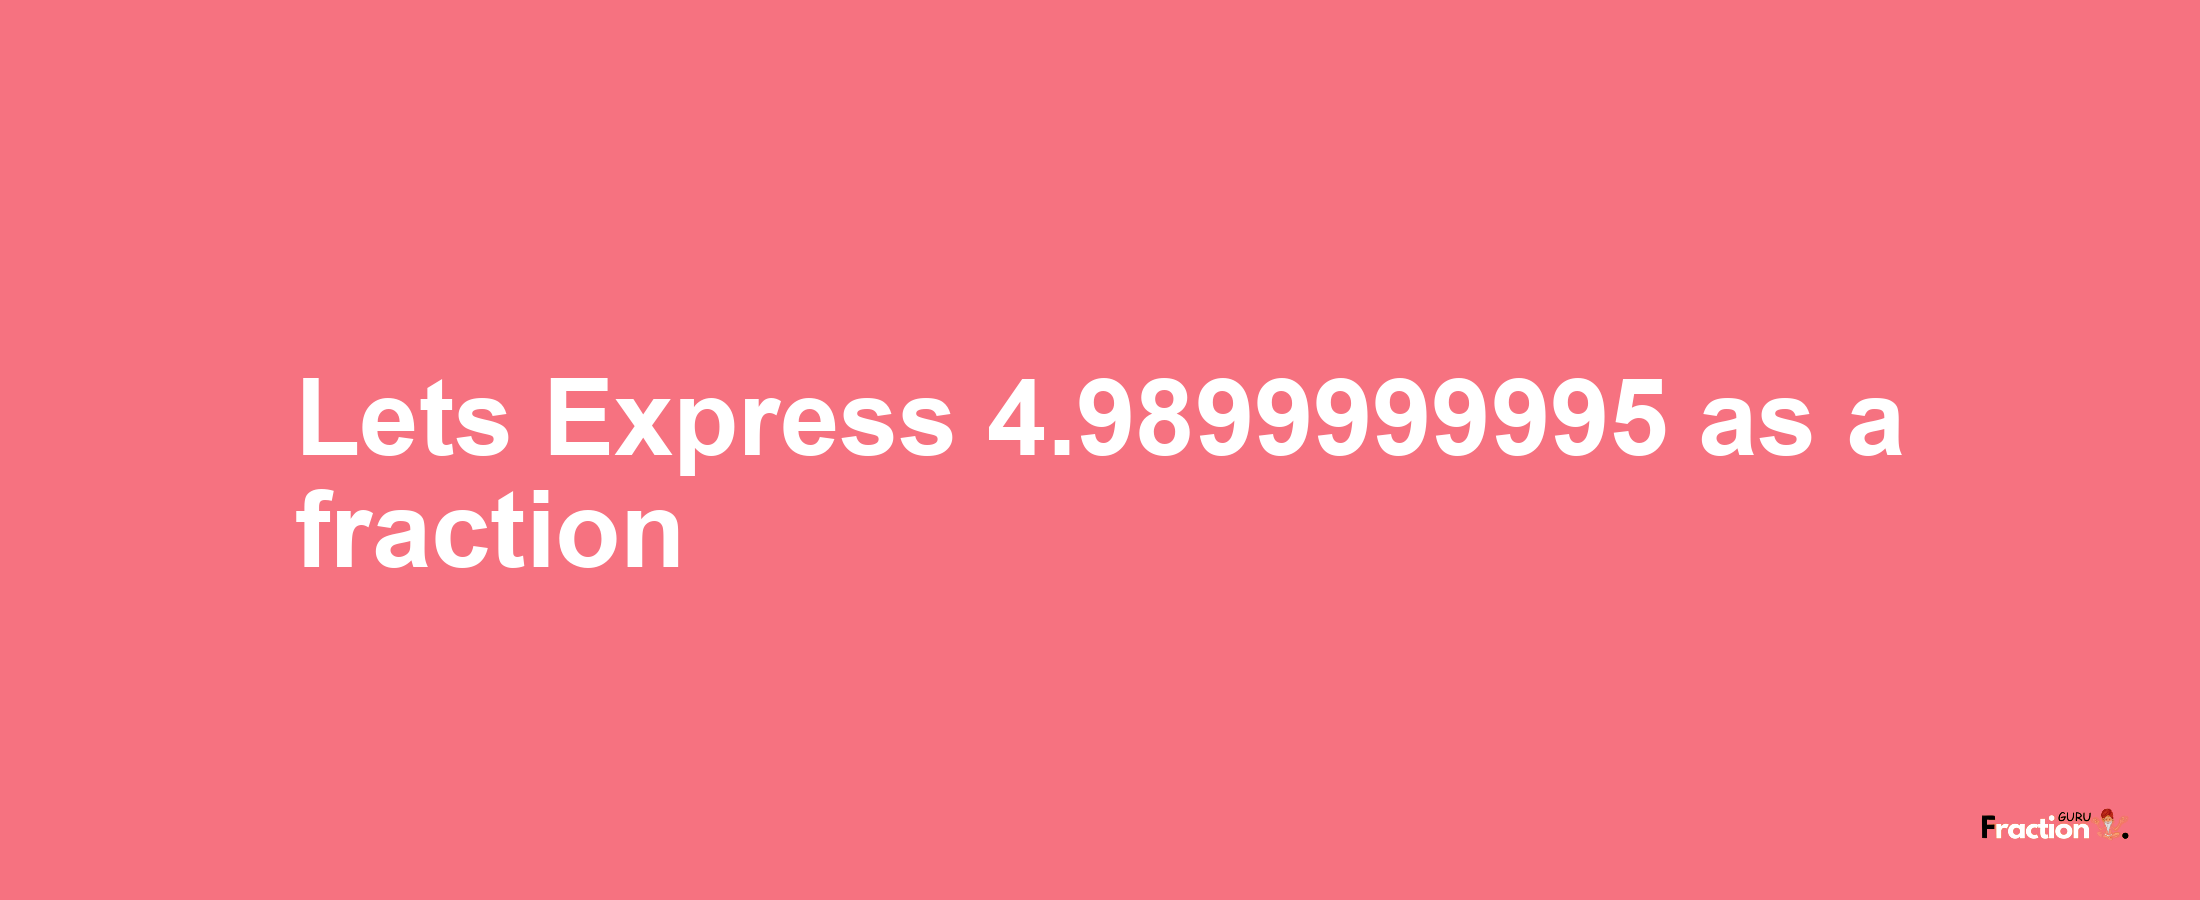 Lets Express 4.9899999995 as afraction